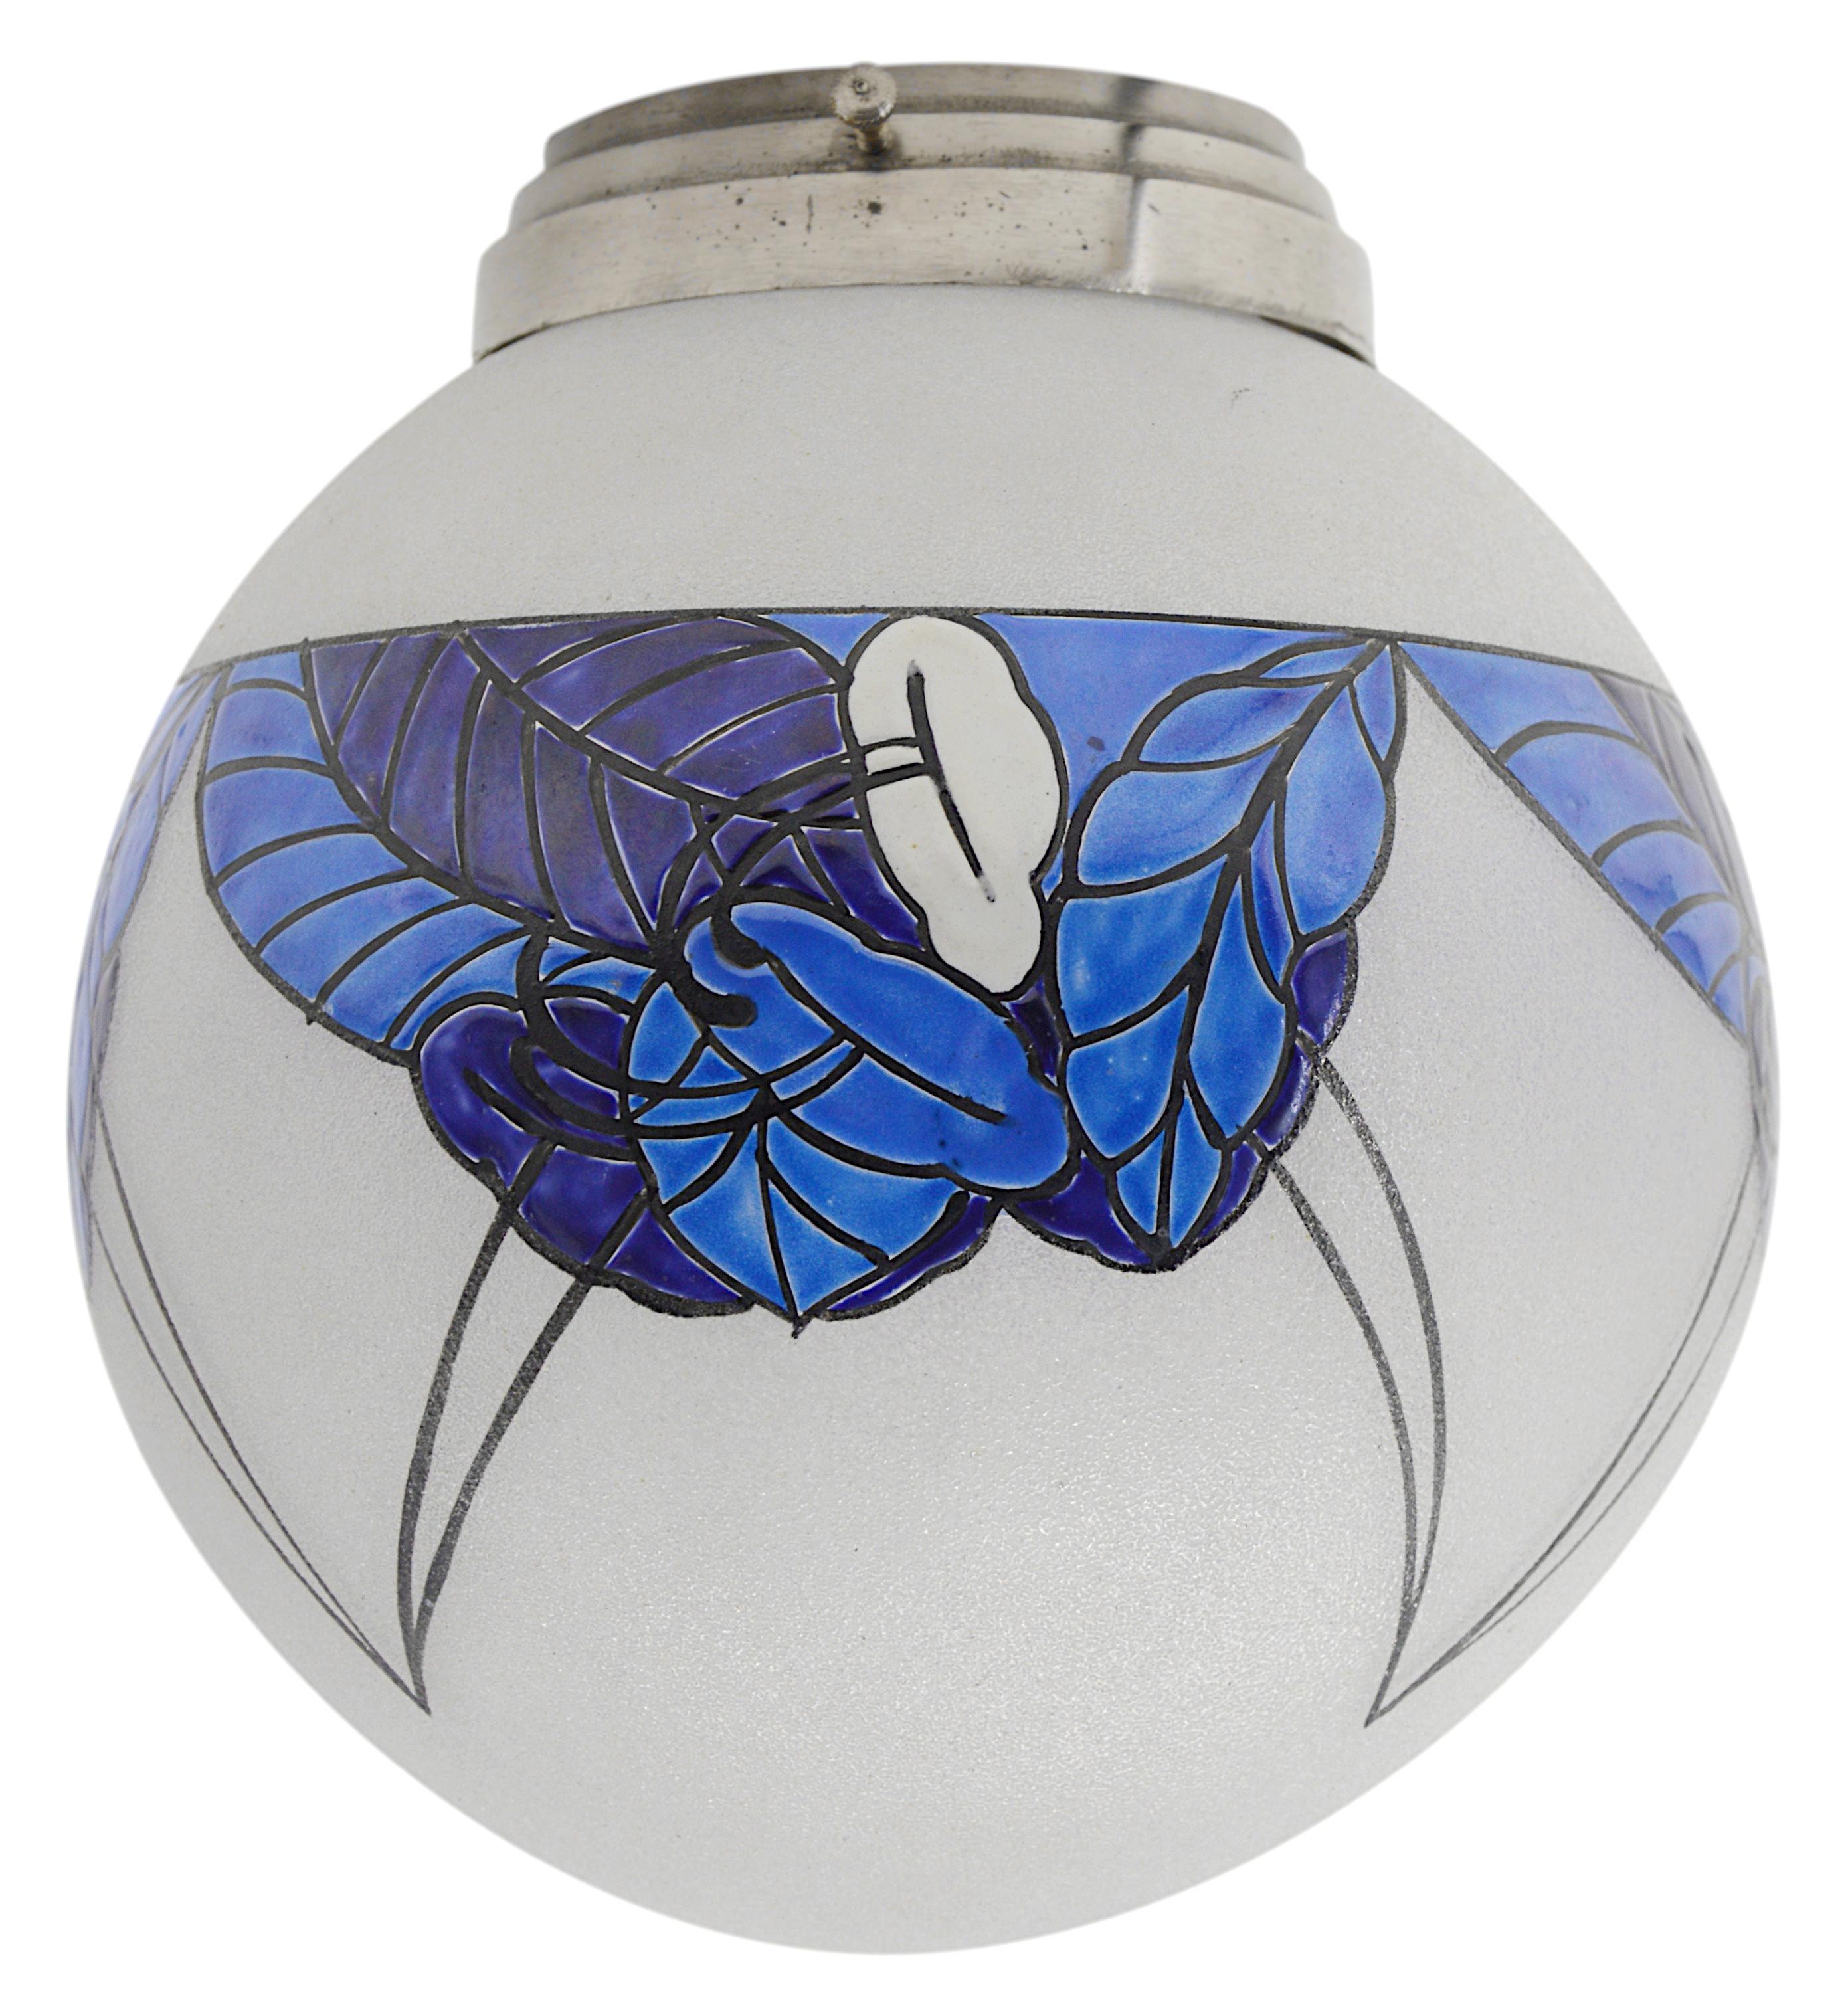 French Art Deco flush mount by LEUNE, 28bis rue du Cardinal Lemoine, Paris, France, 1920s. Enameled granite glass shade hung at its nickel plated brass fixture. Measures: Height : 9.45